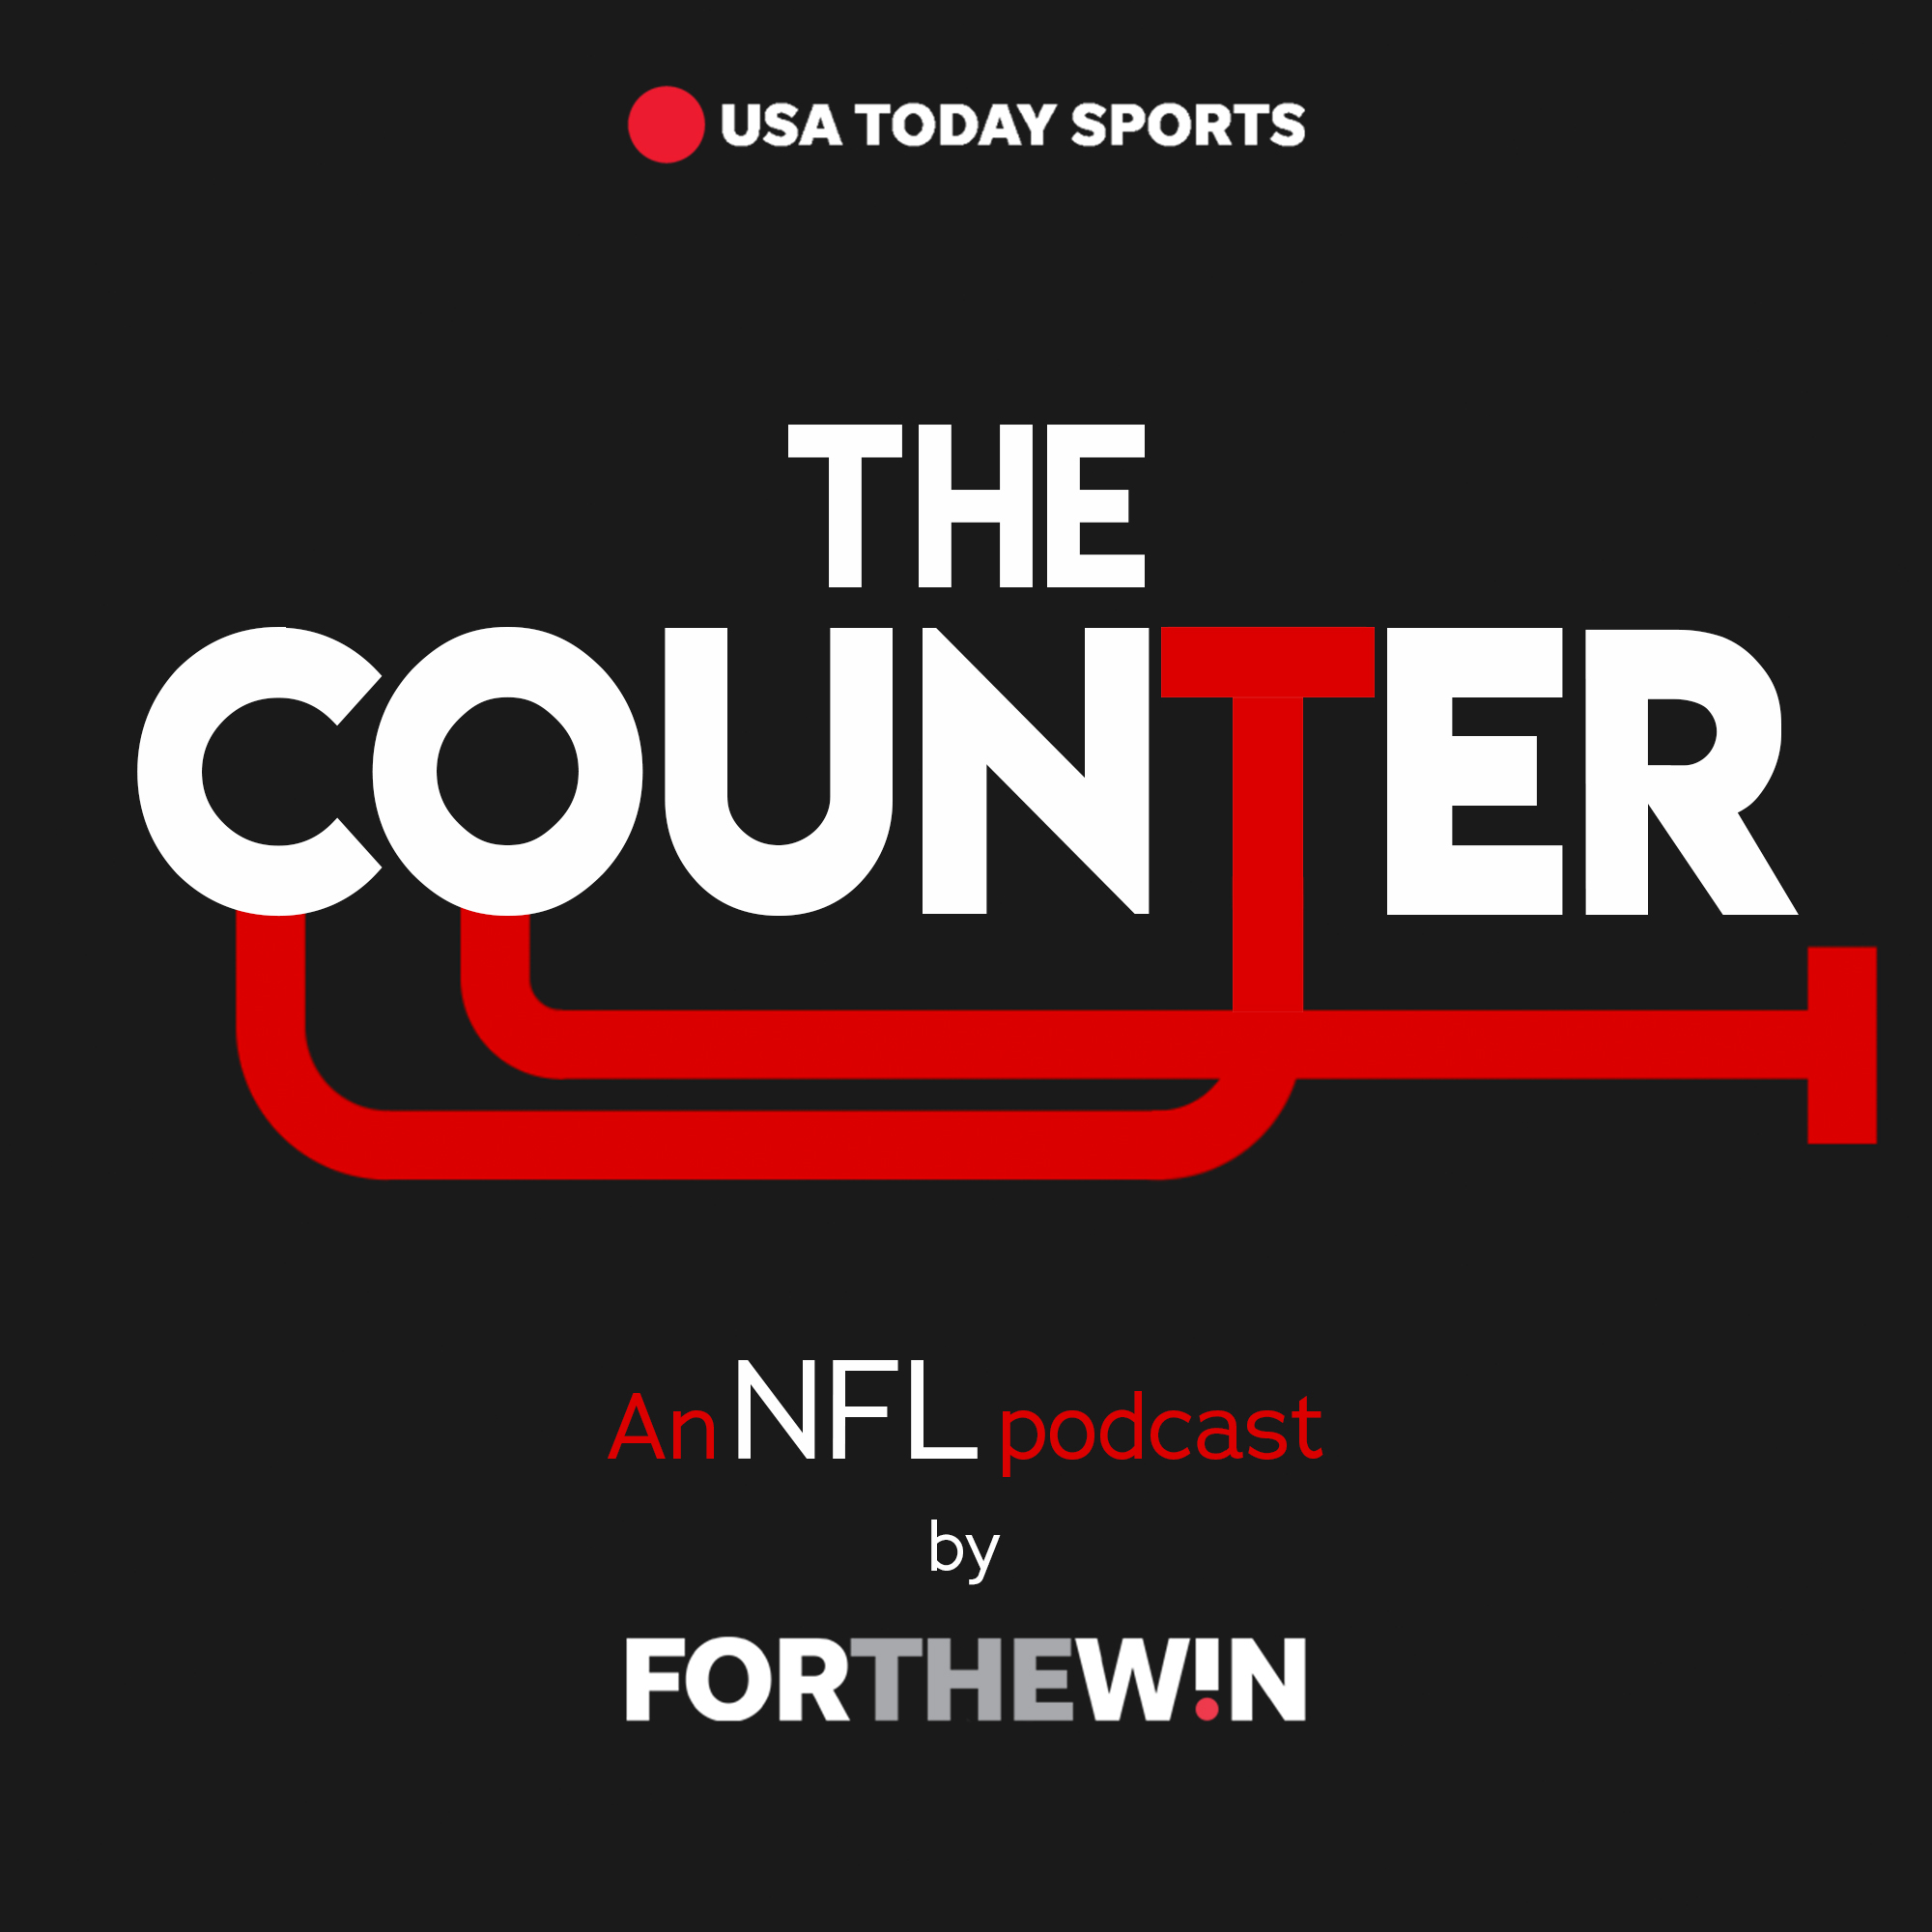 The Counter: An NFL Podcast by For The Win - It's Super Bowl 55 week, but it feels very different - Breaking down the big game with The Nerds